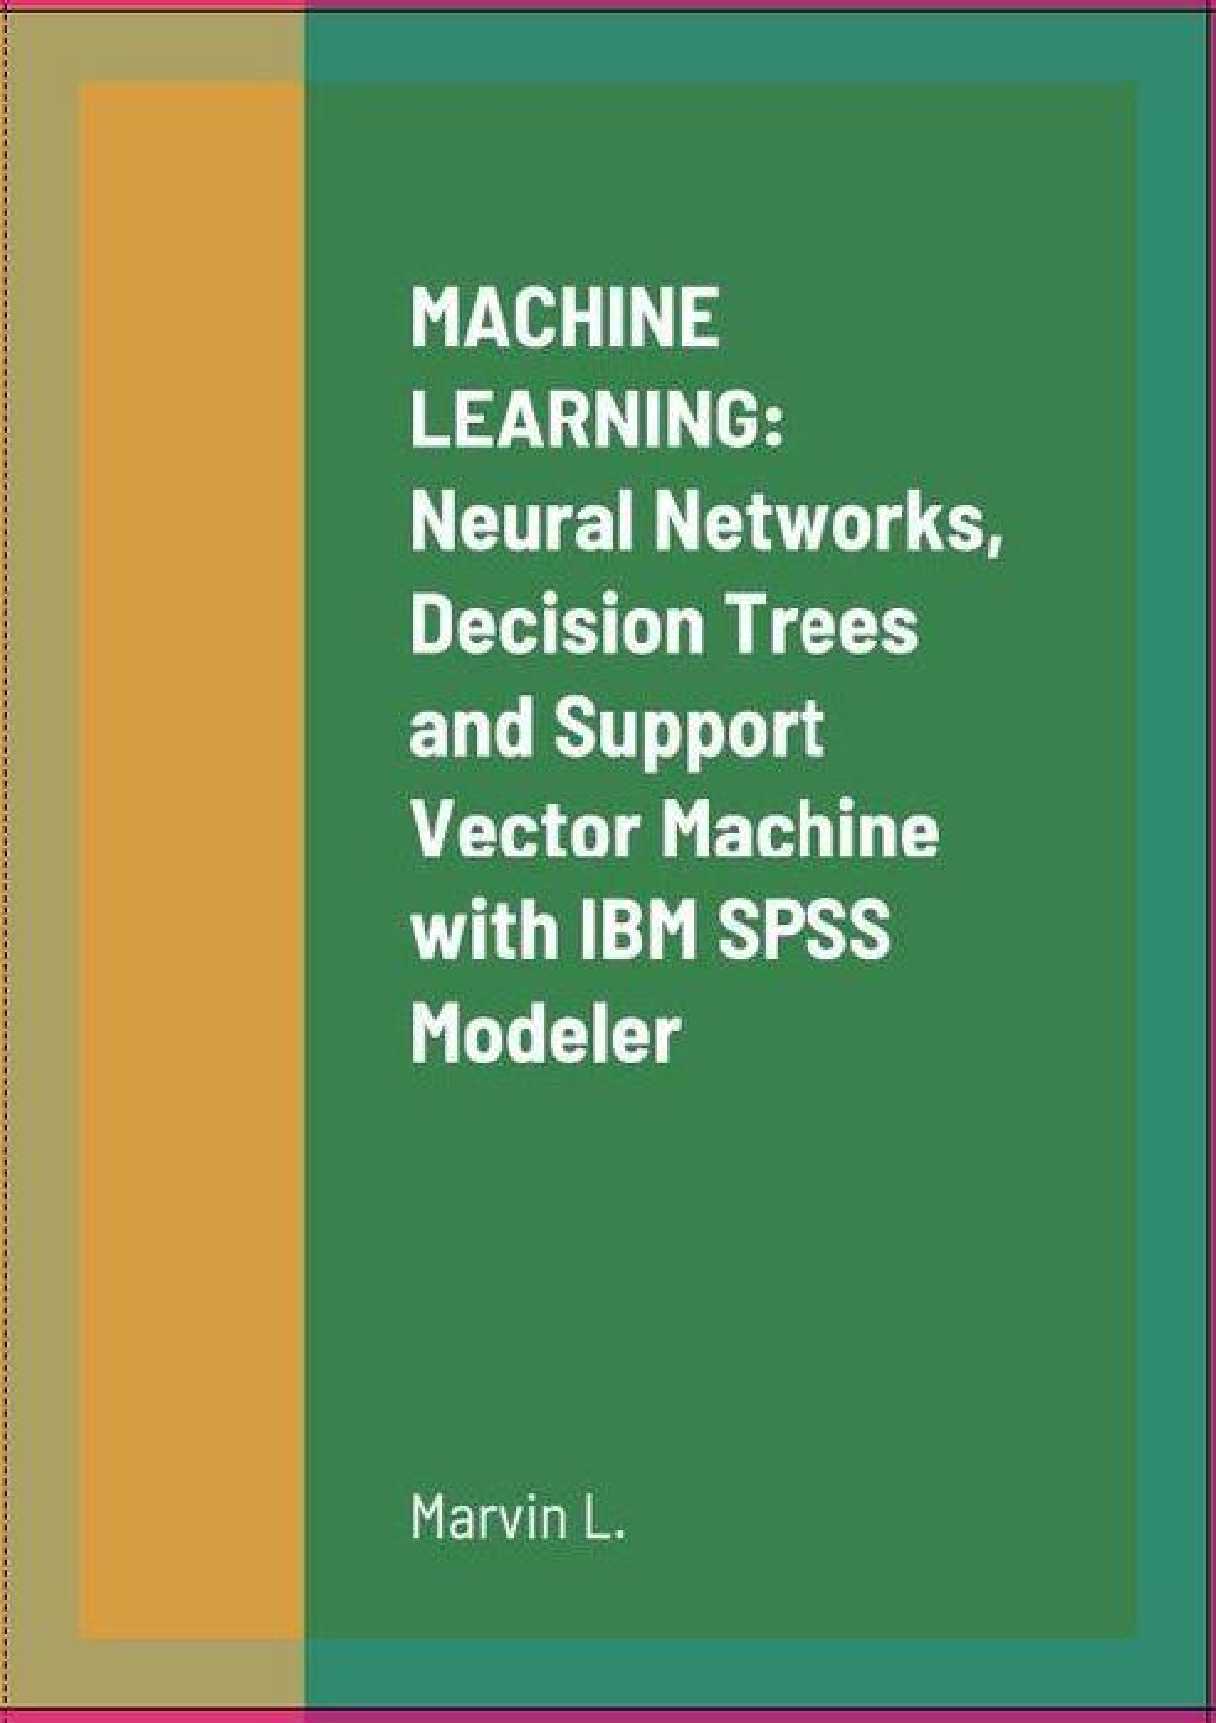 MACHINE LEARNING: Neural Networks, Decision Trees and Support Vector Machine with IBM SPSS Modeler